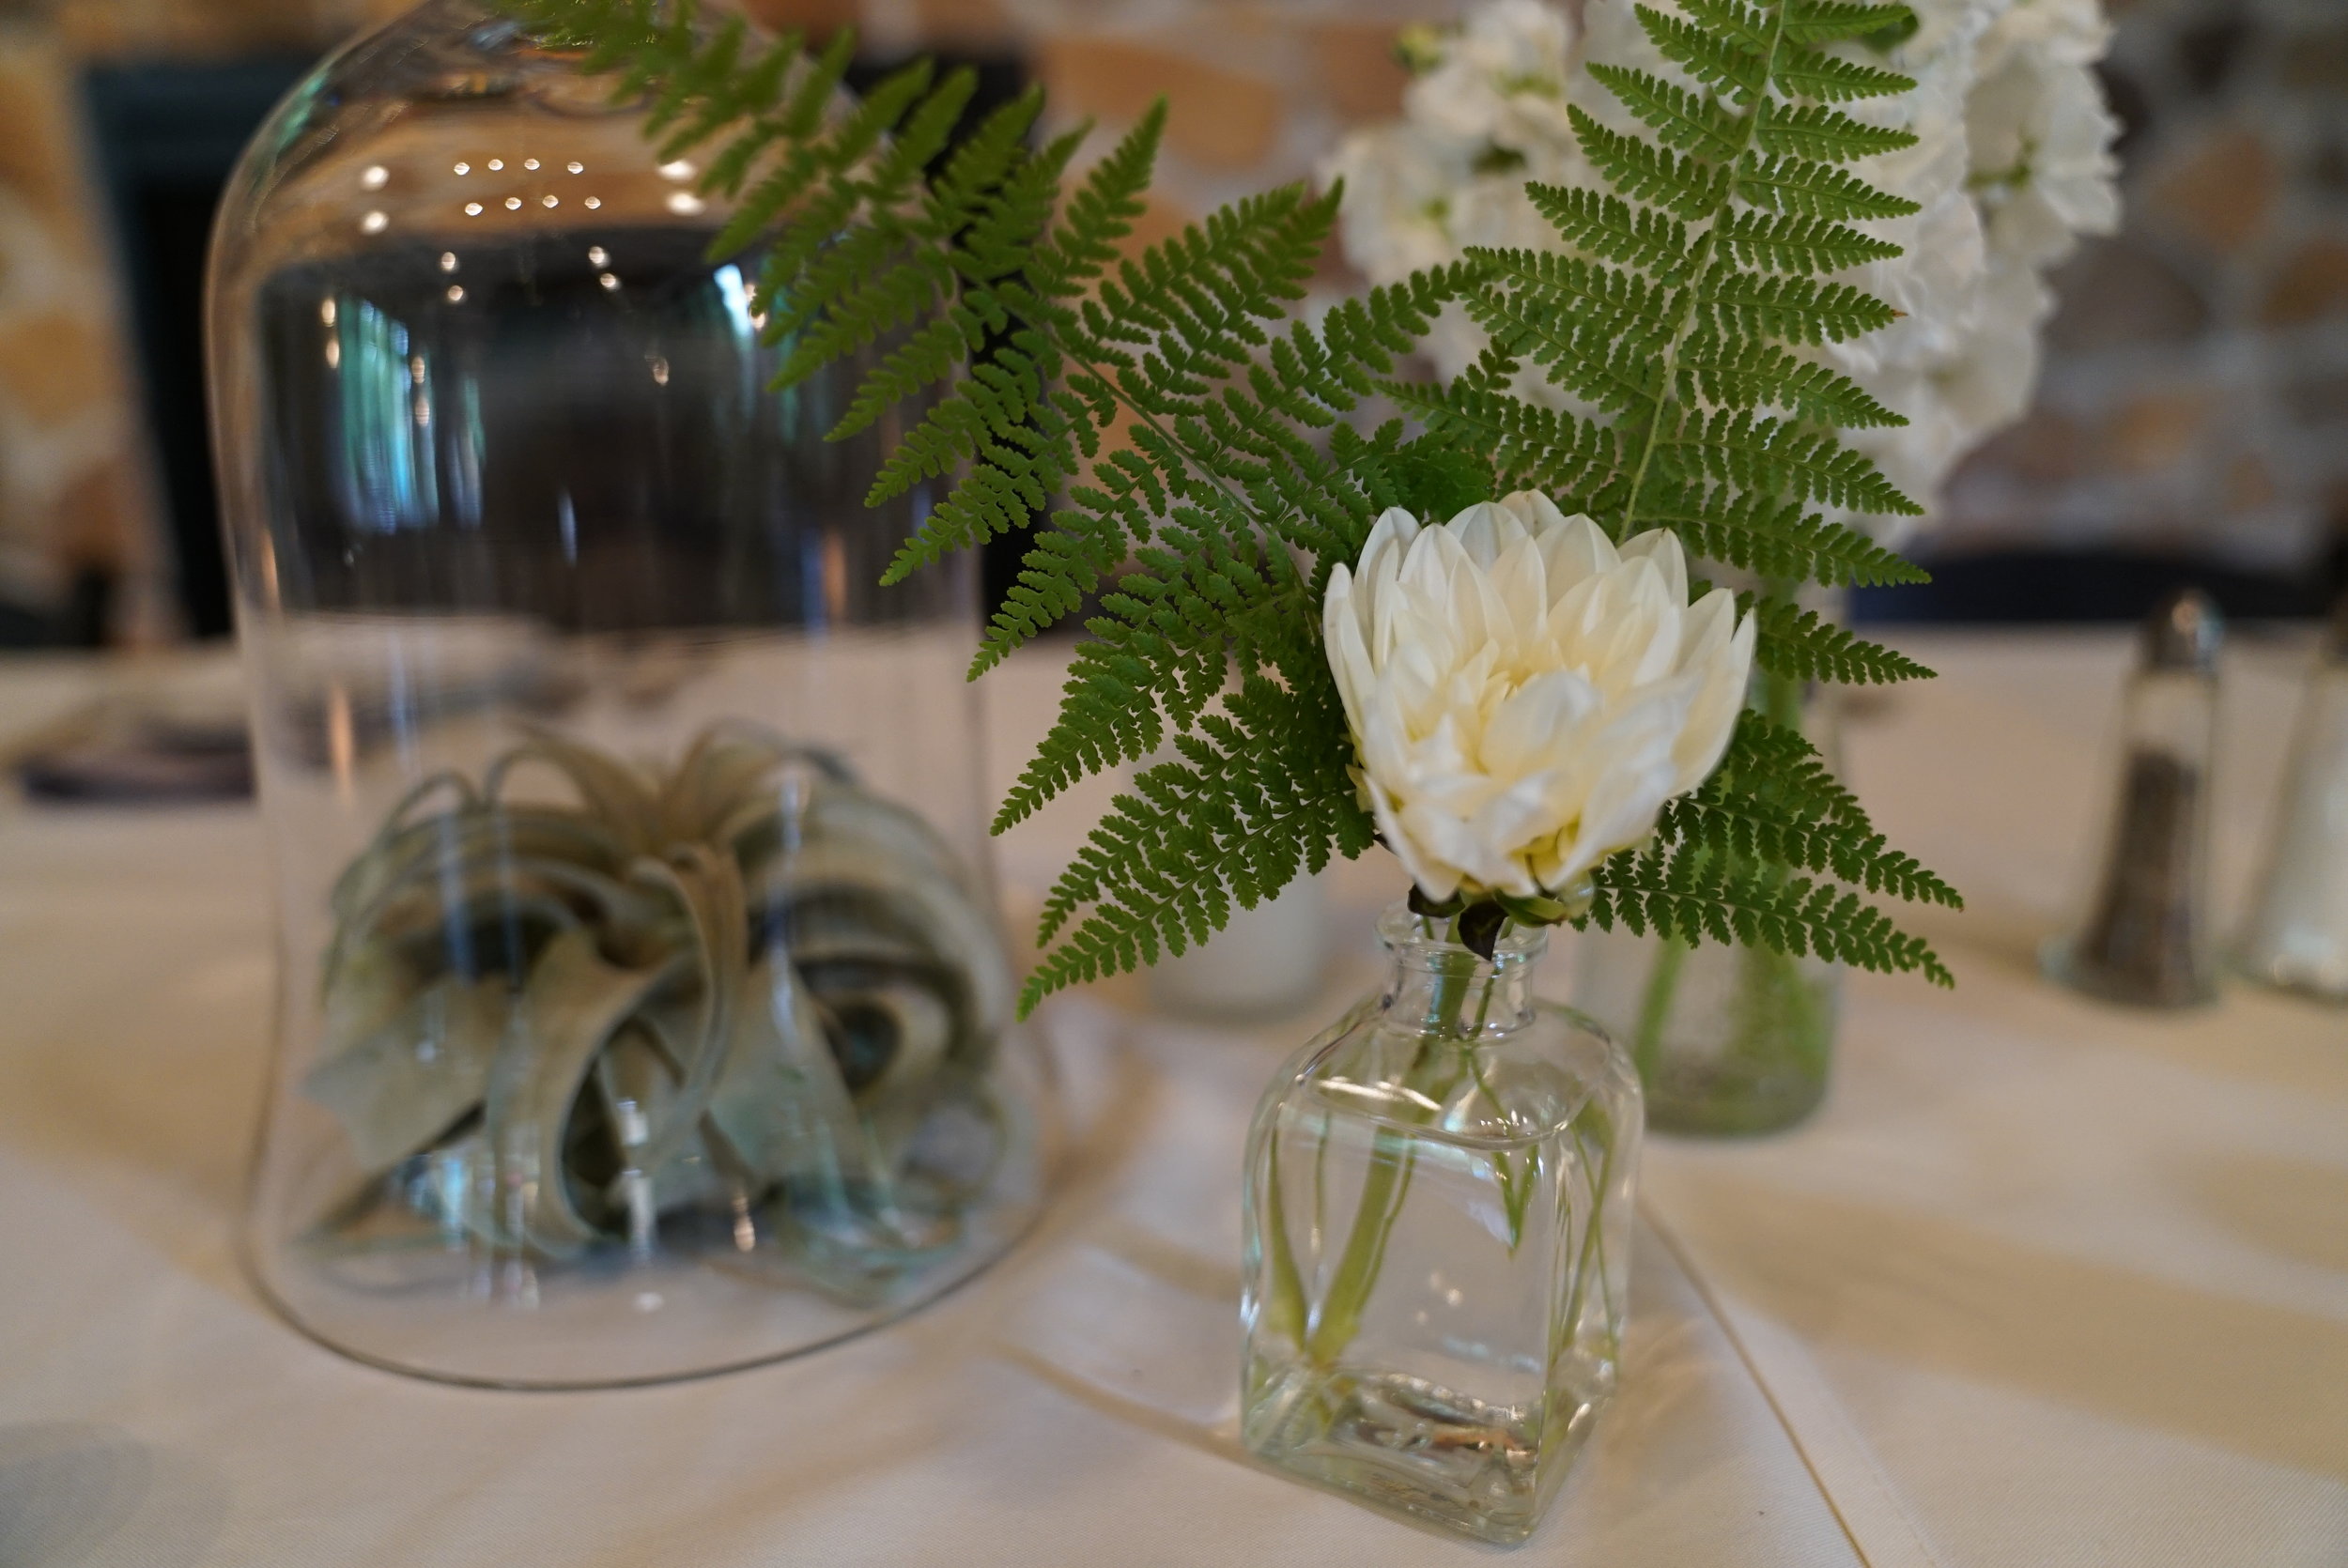  Dahlias, ferns and tillandsias on the head table. We set out vases for all the bridal bouquets so that they could get a drink of fresh water while everyone was dancing the night away.&nbsp; 